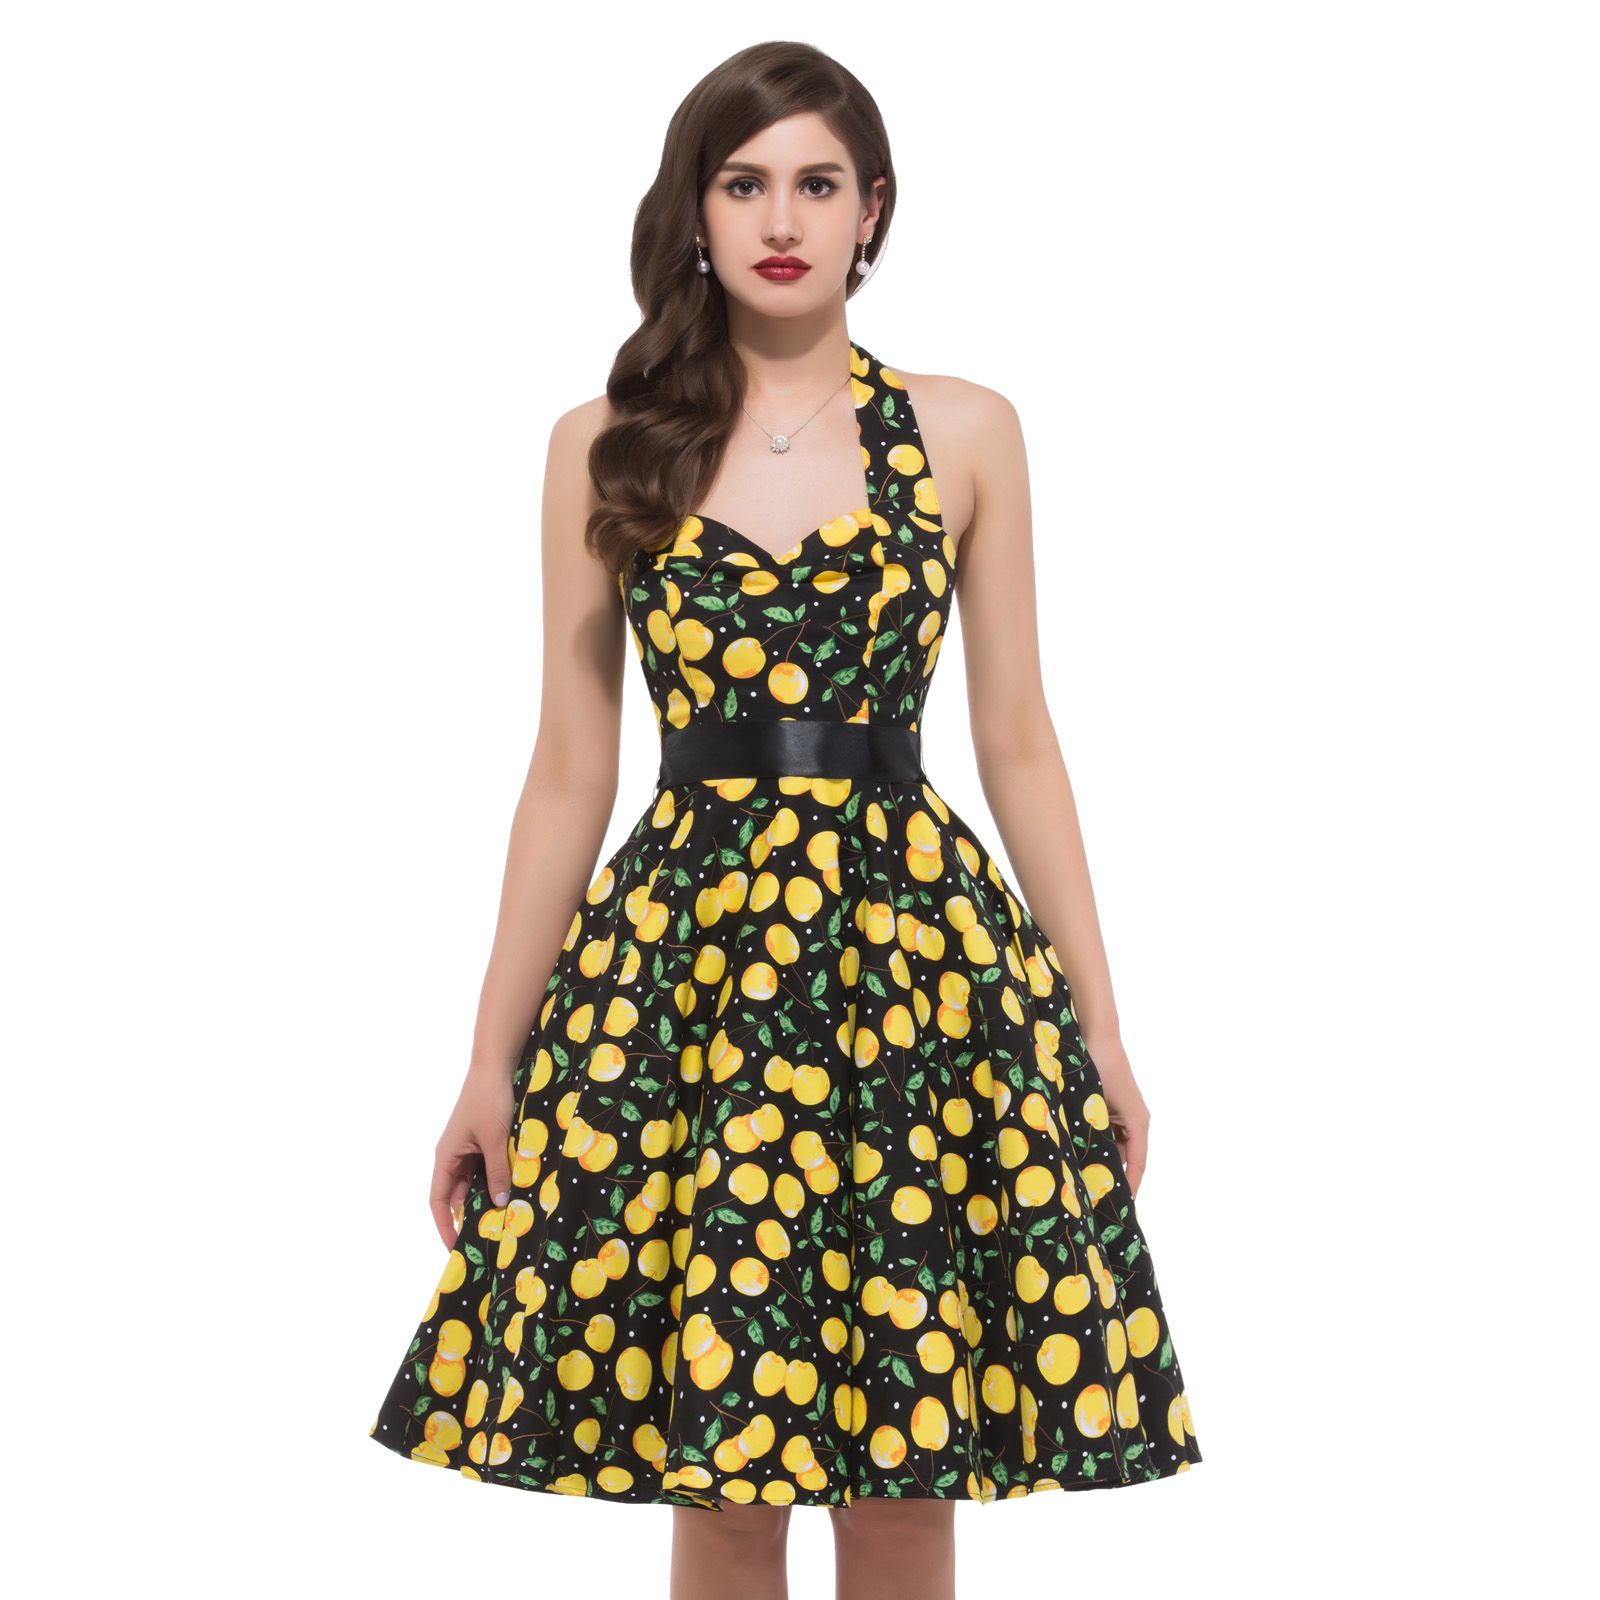 ... Vintage 50s 60s Rockabilly Swing Pinup Casual Cocktail Dresses CL6075